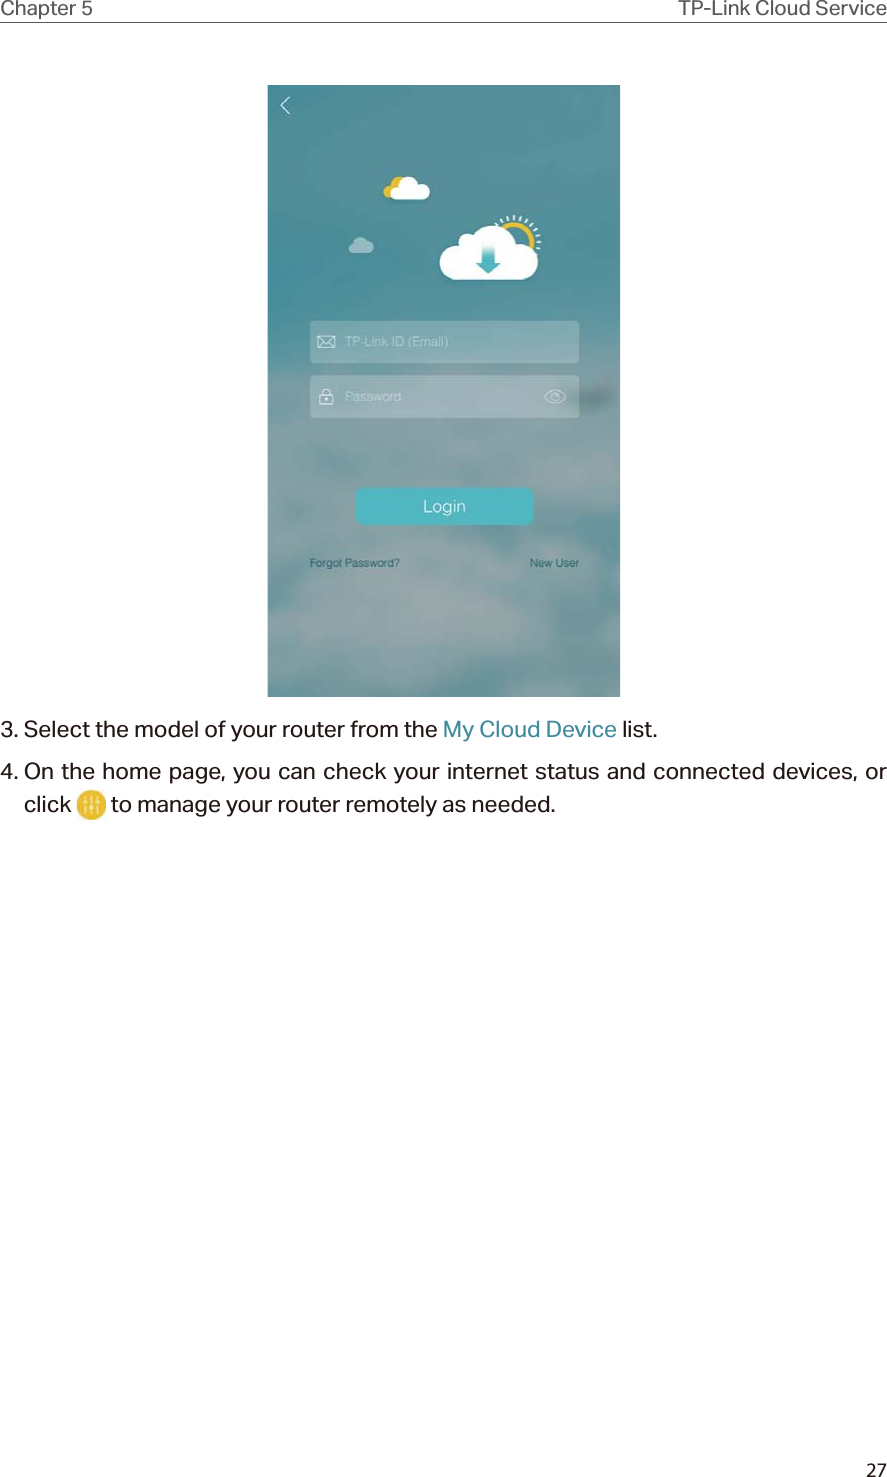 27Chapter 5 TP-Link Cloud Service3. Select the model of your router from the My Cloud Device list.4. On the home page, you can check your internet status and connected devices, or click   to manage your router remotely as needed.